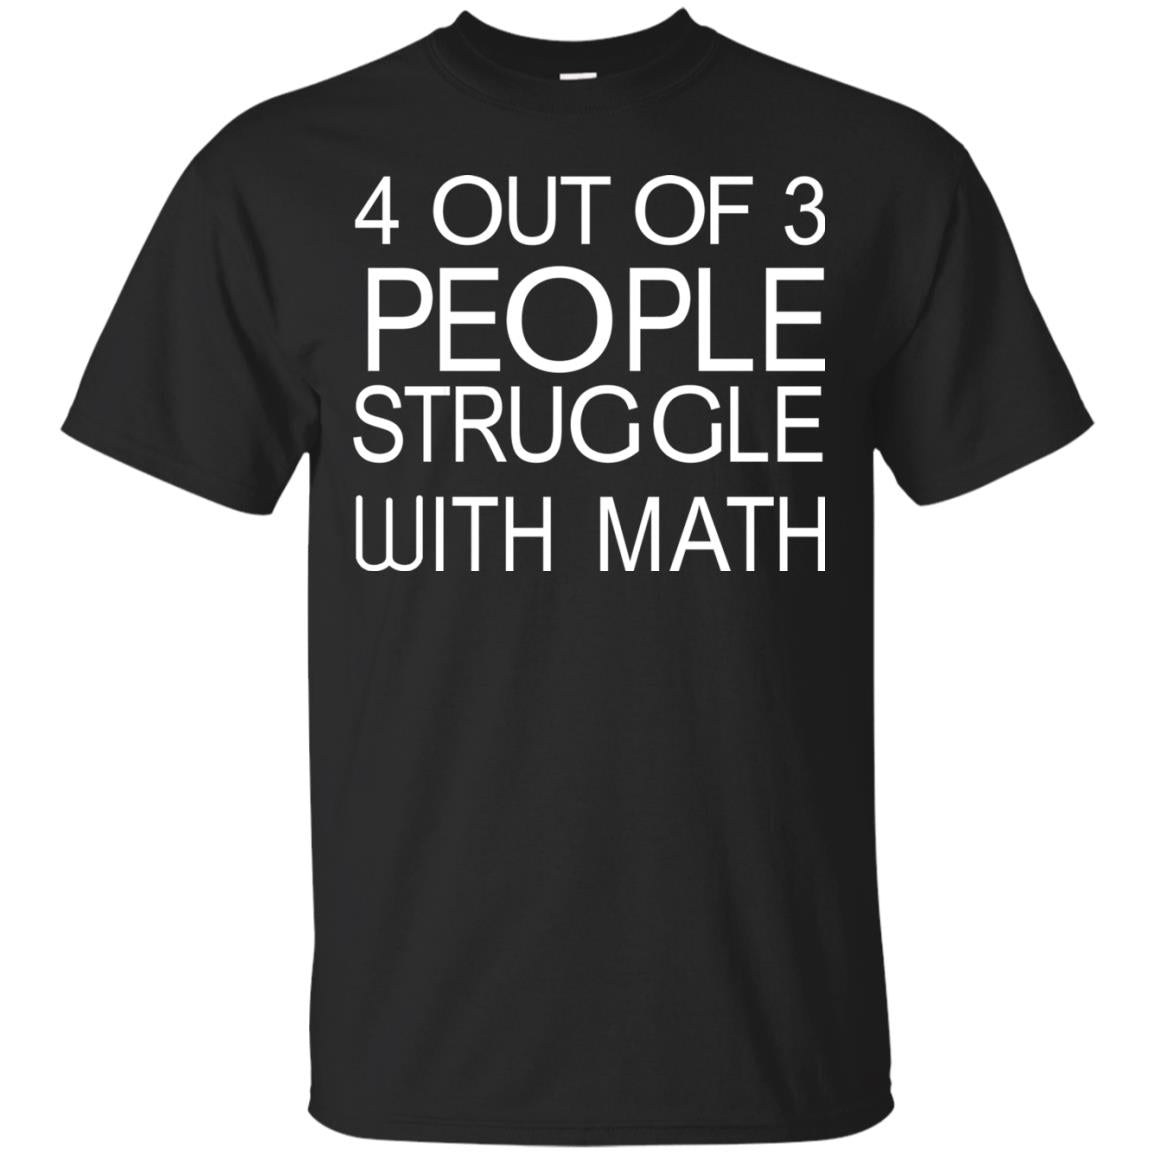 4 Out Of 3 People Struggle With Math Shirt